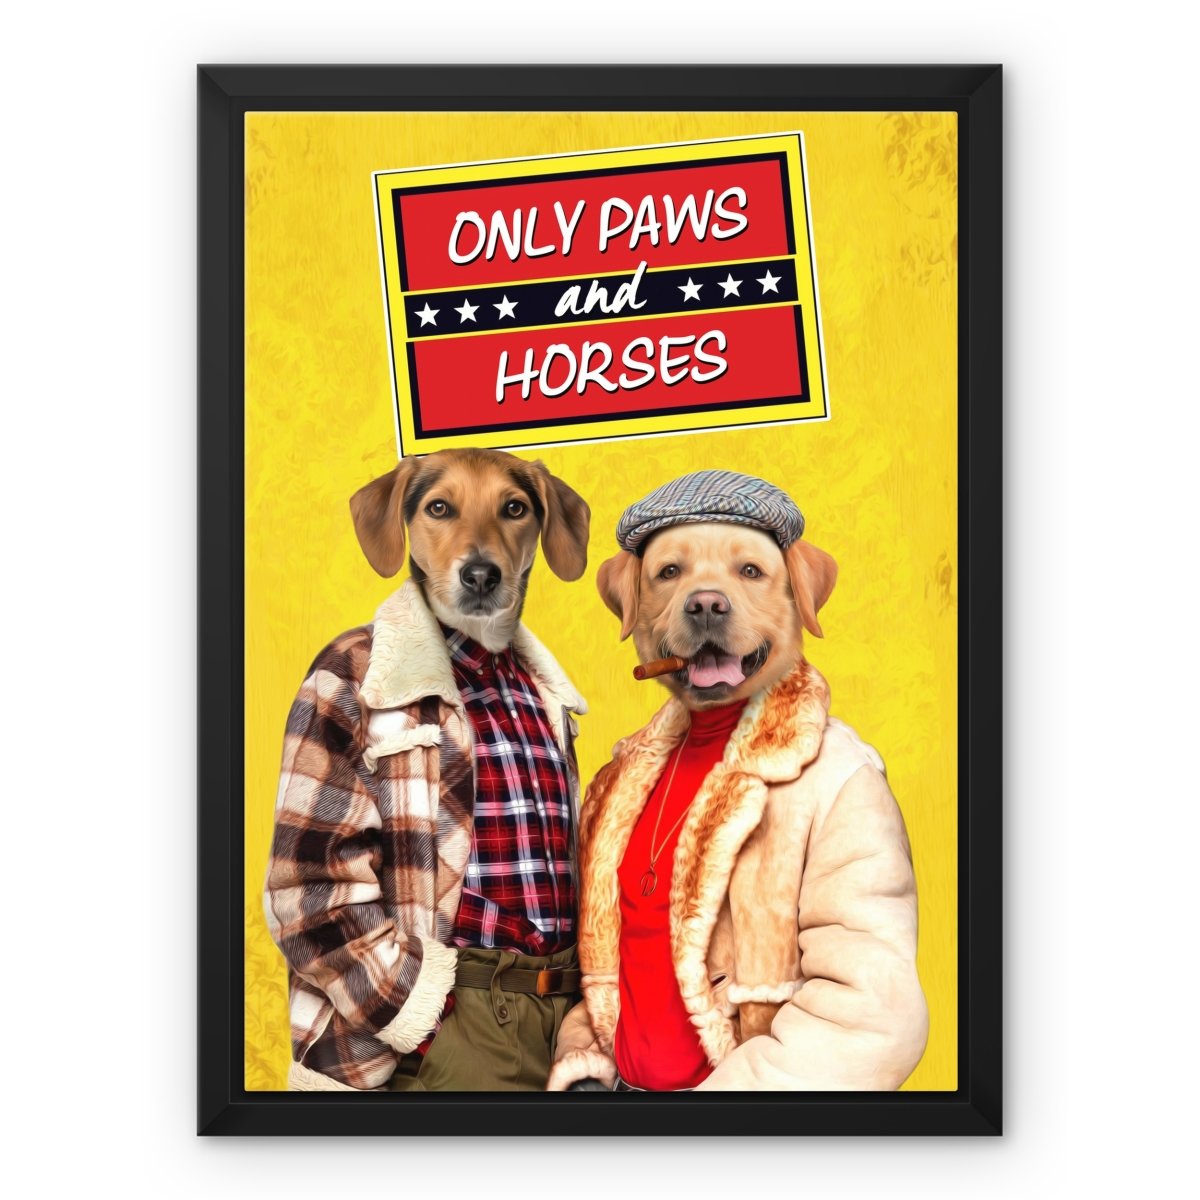 Only Paws & Horses: Custom 2 Pet Canvas - Paw & Glory - #pet portraits# - #dog portraits# - #pet portraits uk#paw & glory, custom pet portrait canvas,pet art canvas, dog art canvas, custom pet canvas, pet photo canvas, pet on canvas